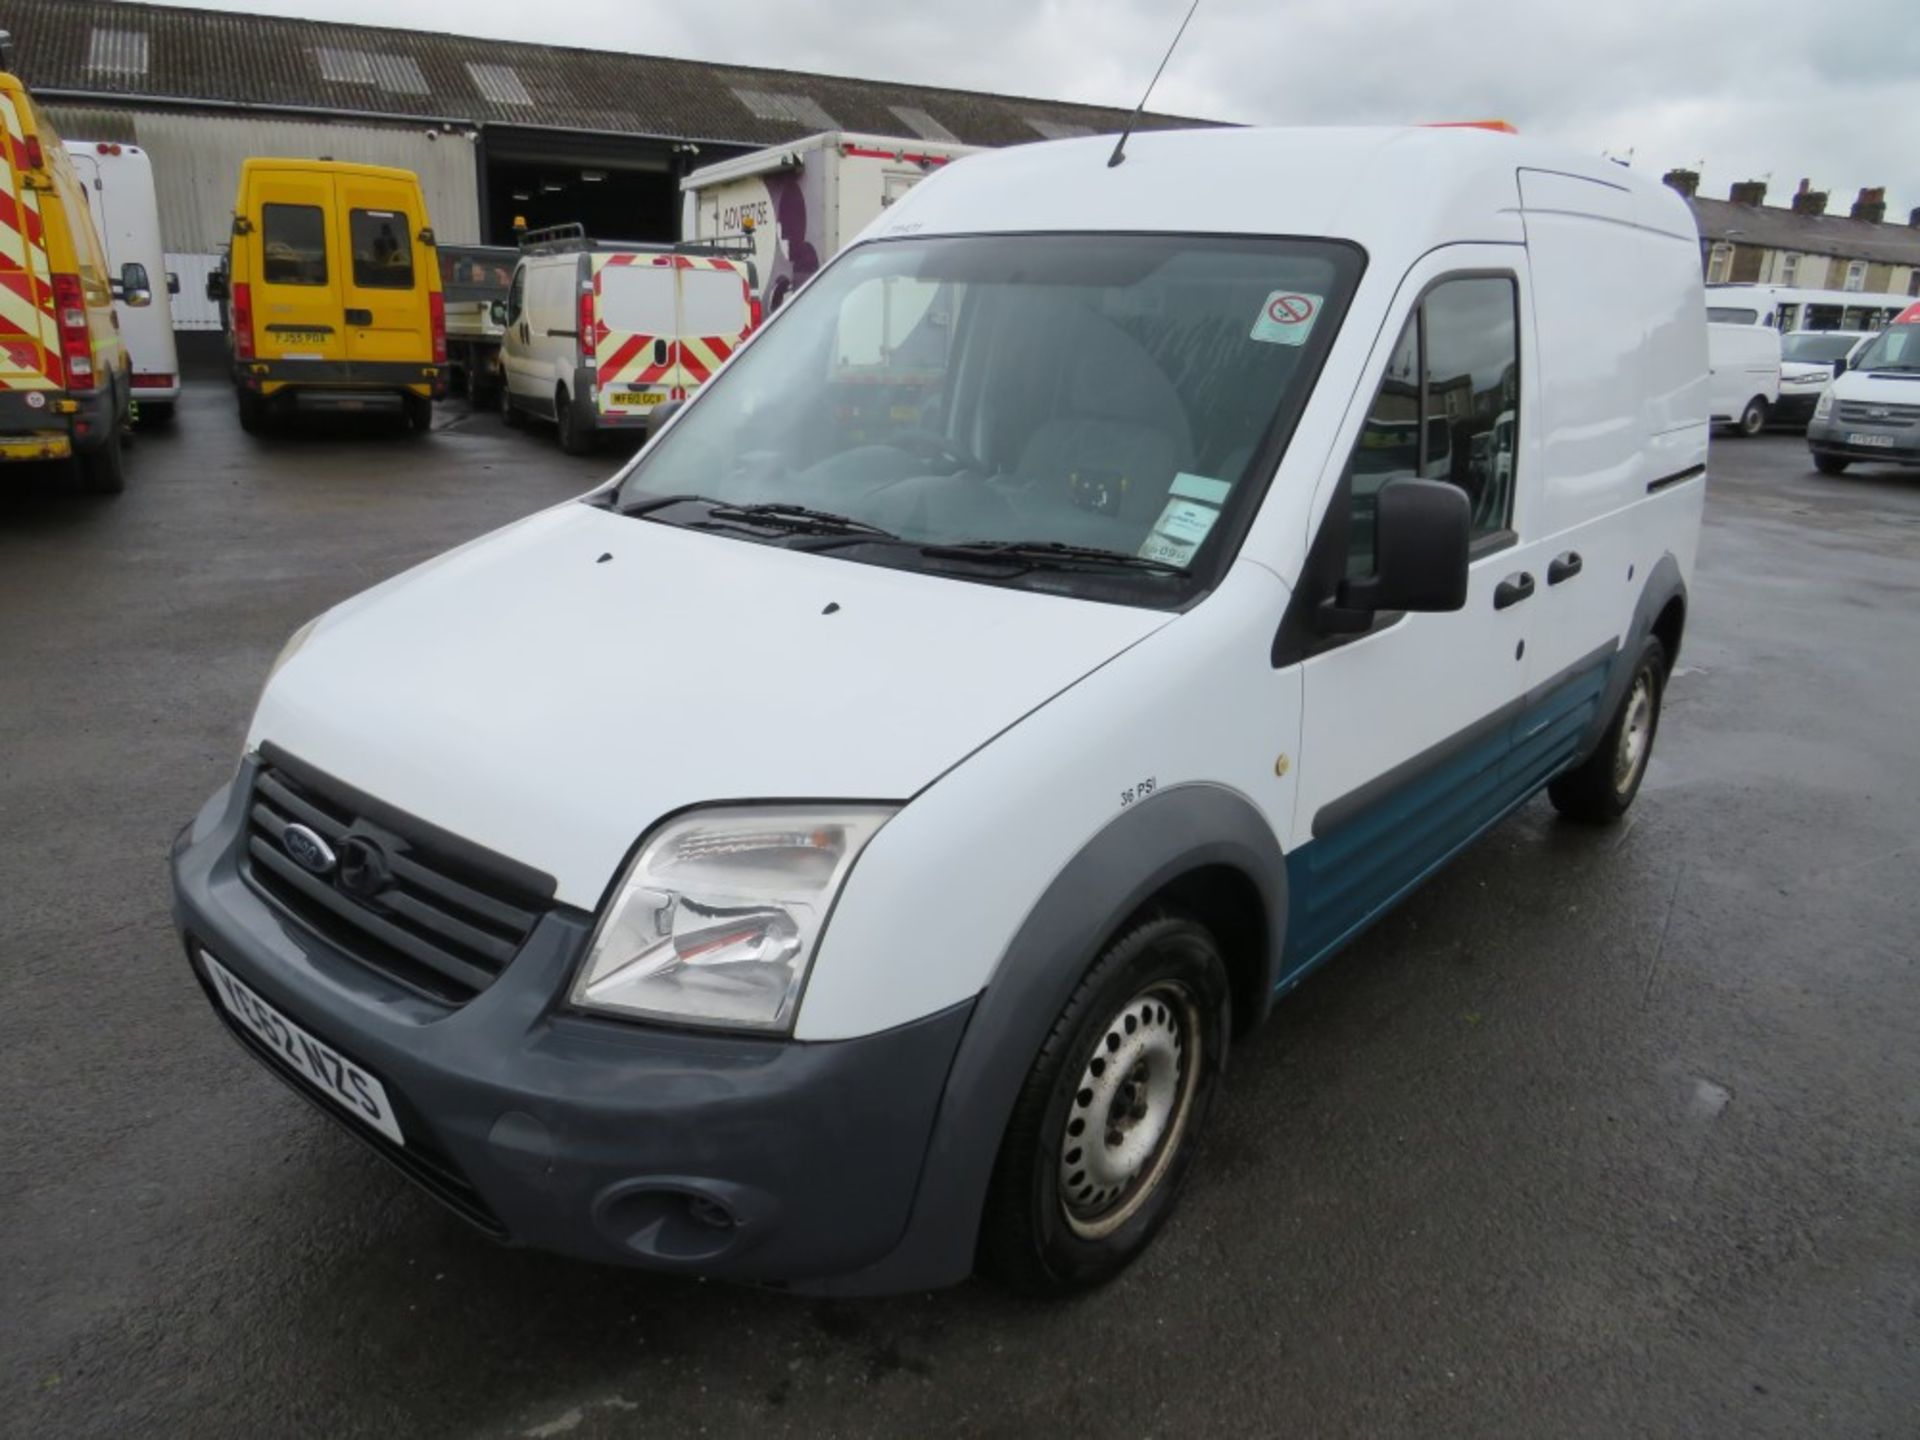 62 reg FORD TRANSIT CONNECT 90 T230 (DIRECT UNITED UTILITIES WATER) 1ST REG 10/12, TEST 07/21, - Image 2 of 7